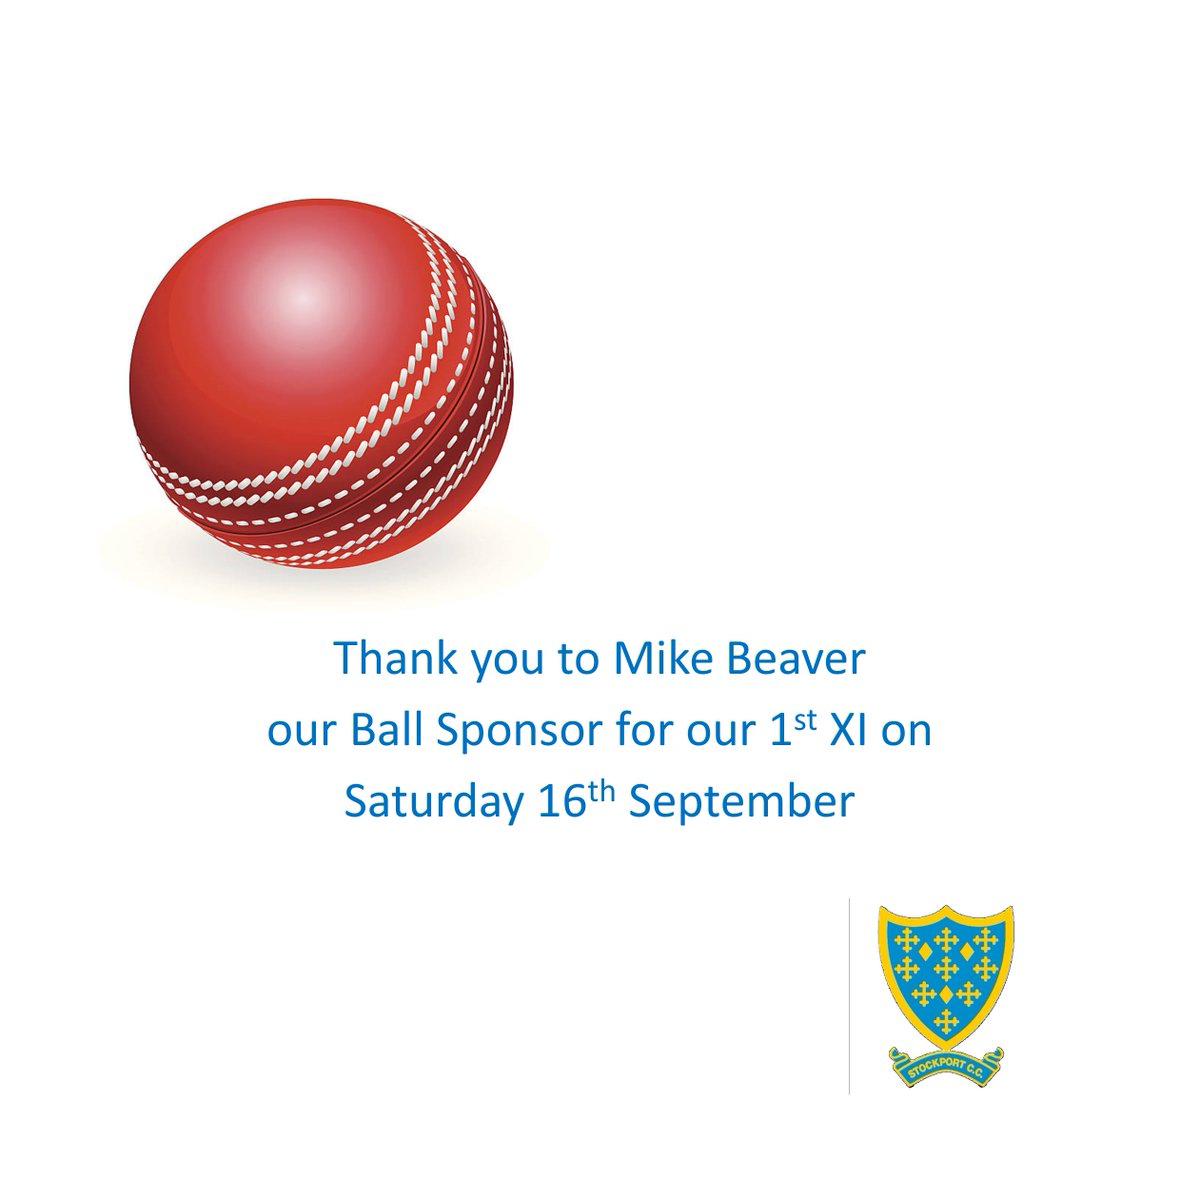 A BIG THANK YOU to Mike Beaver for being the ball sponsor this weekend. Thank you to everyone this season, your support means a lot to us!